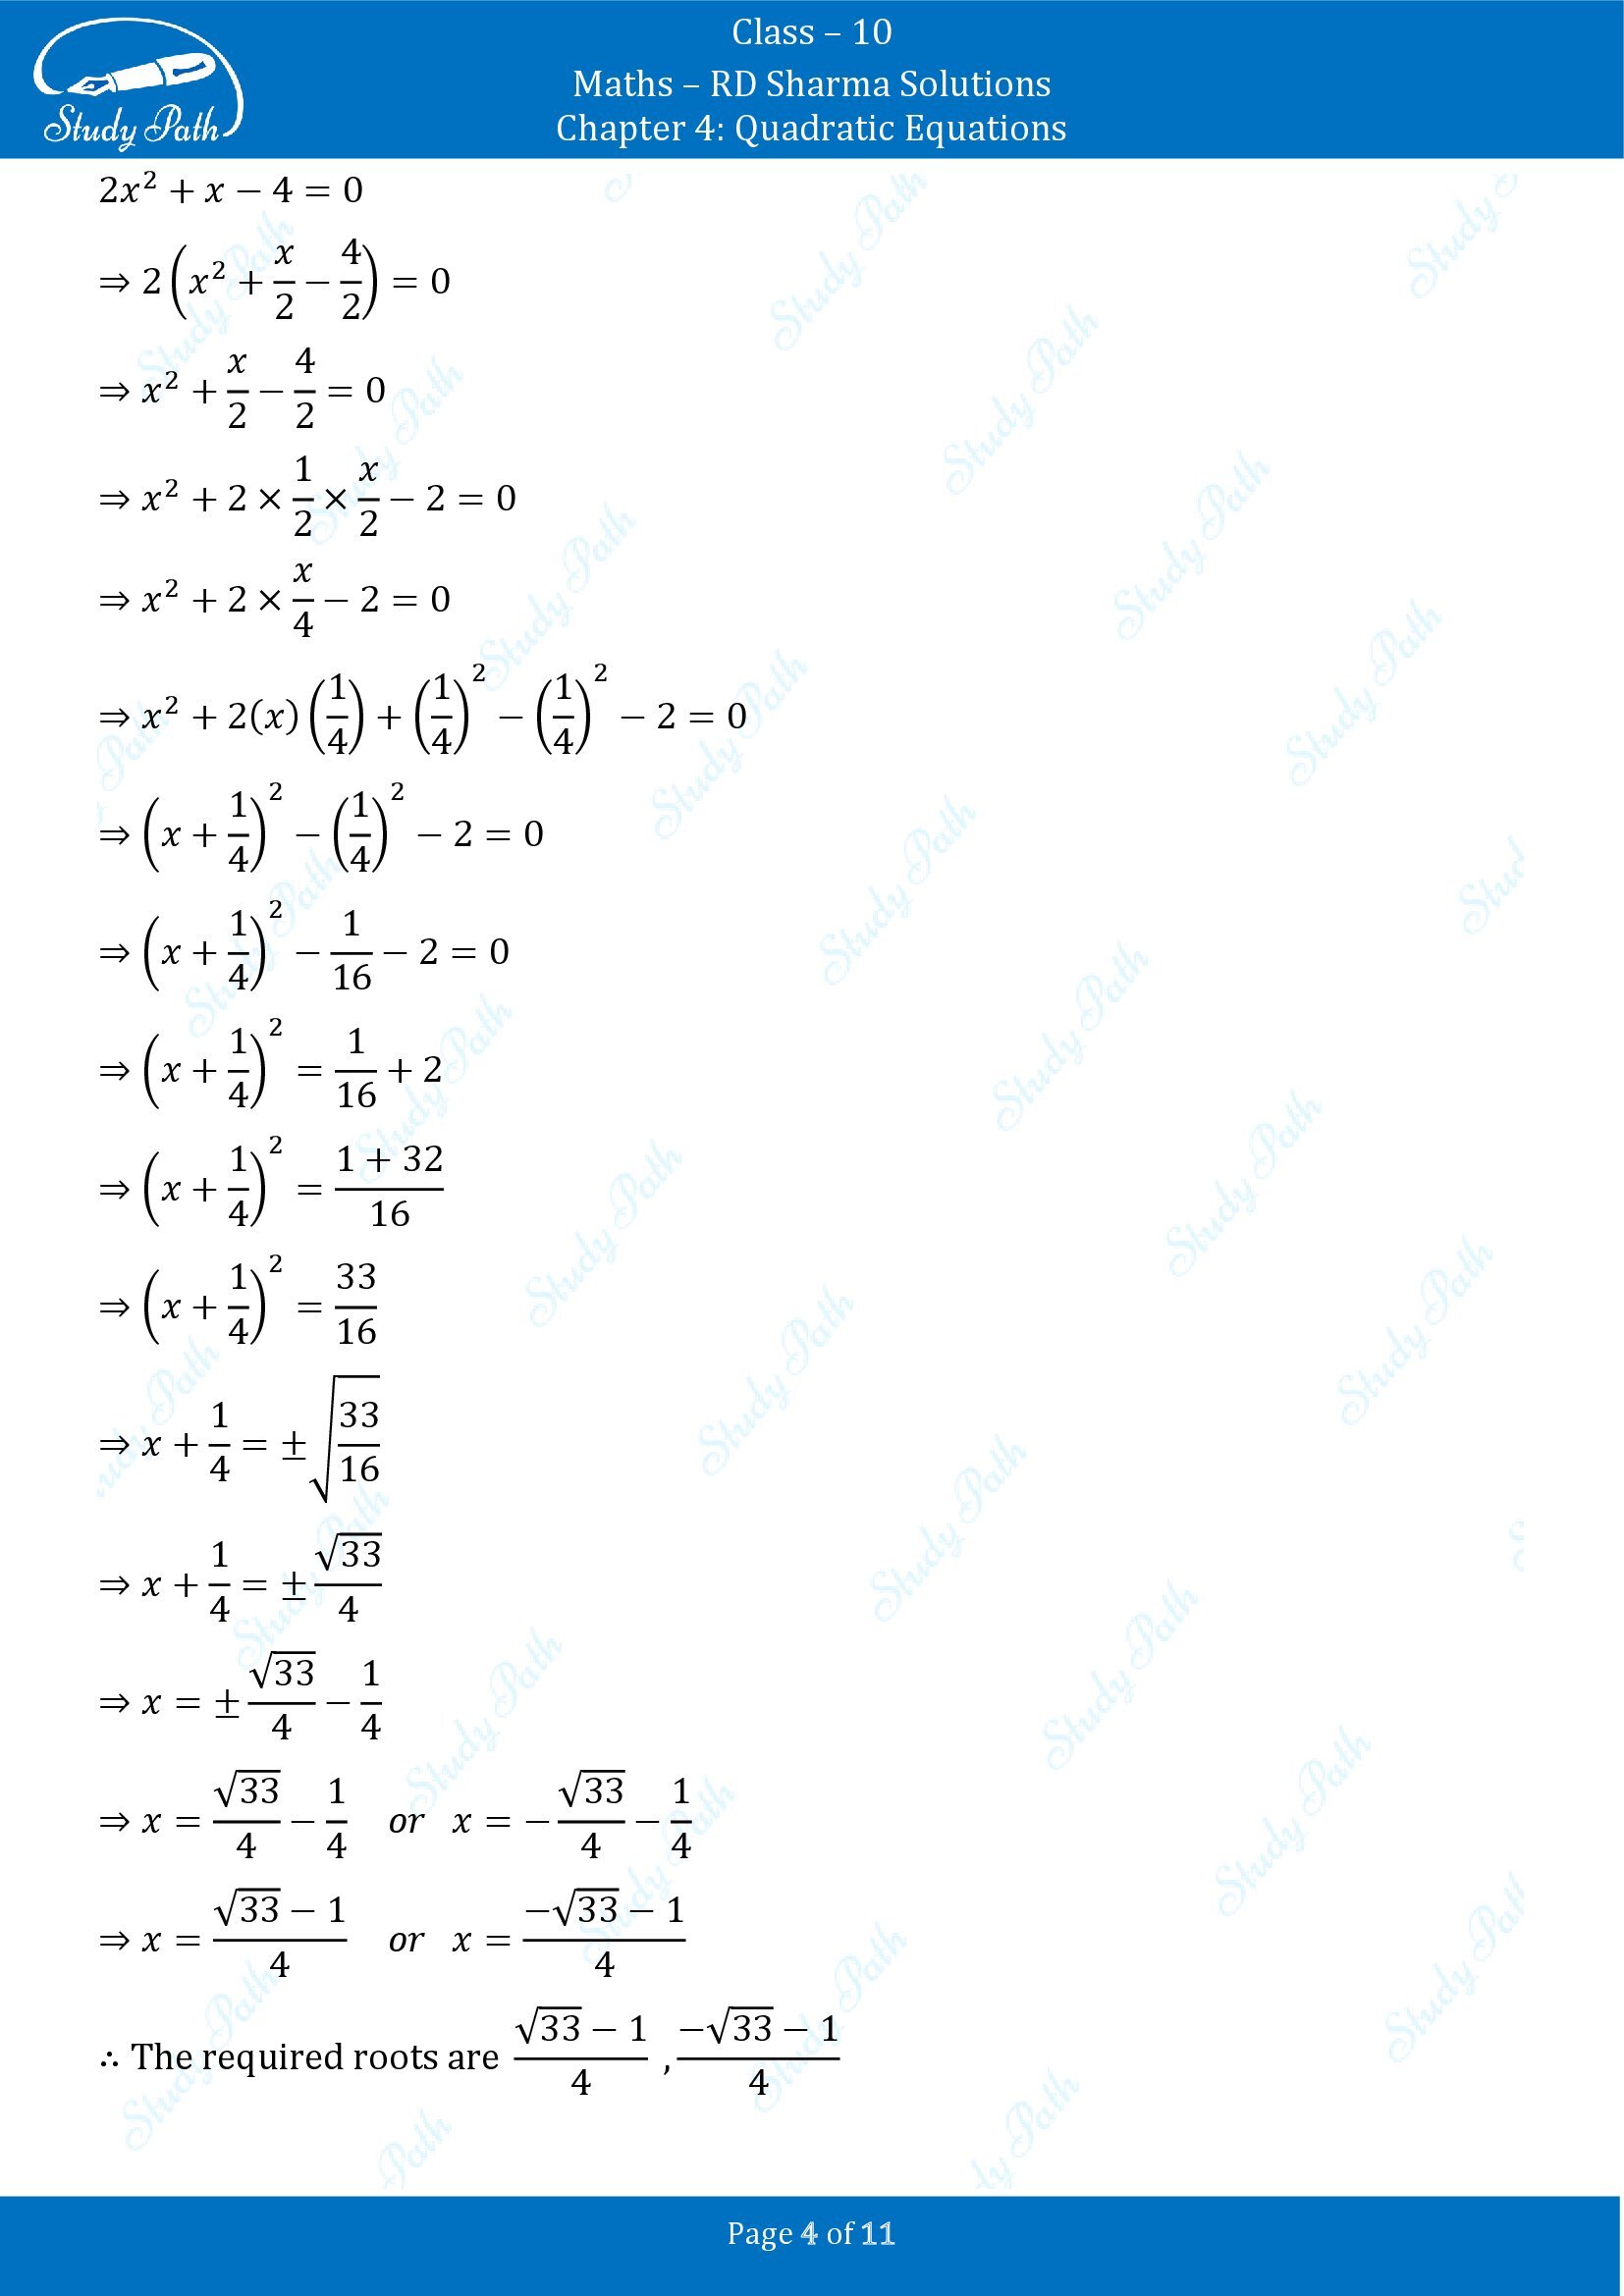 RD Sharma Solutions Class 10 Chapter 4 Quadratic Equations Exercise 4.4 00004